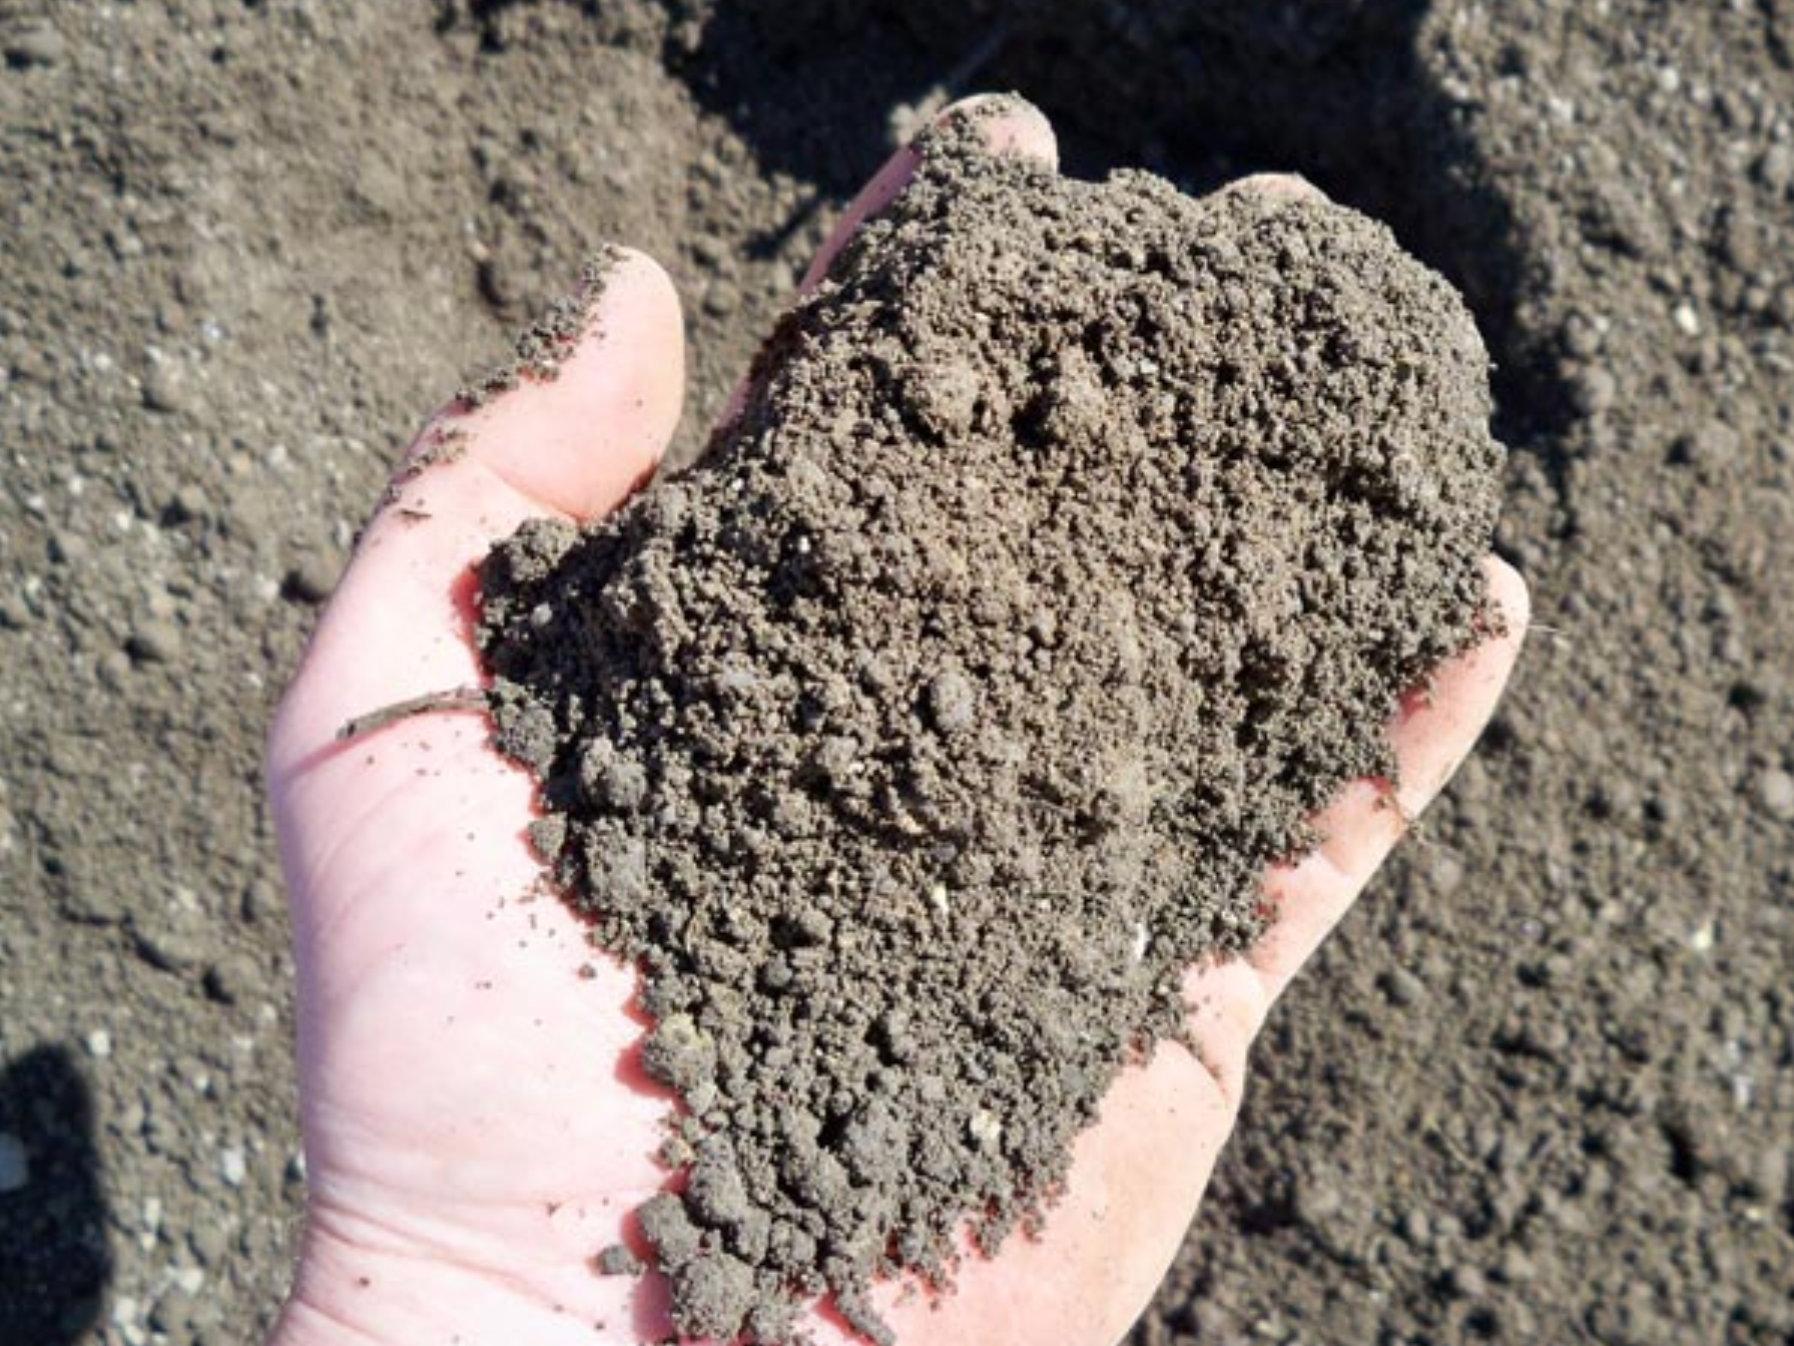 a person is holding a pile of dirt in their hand .